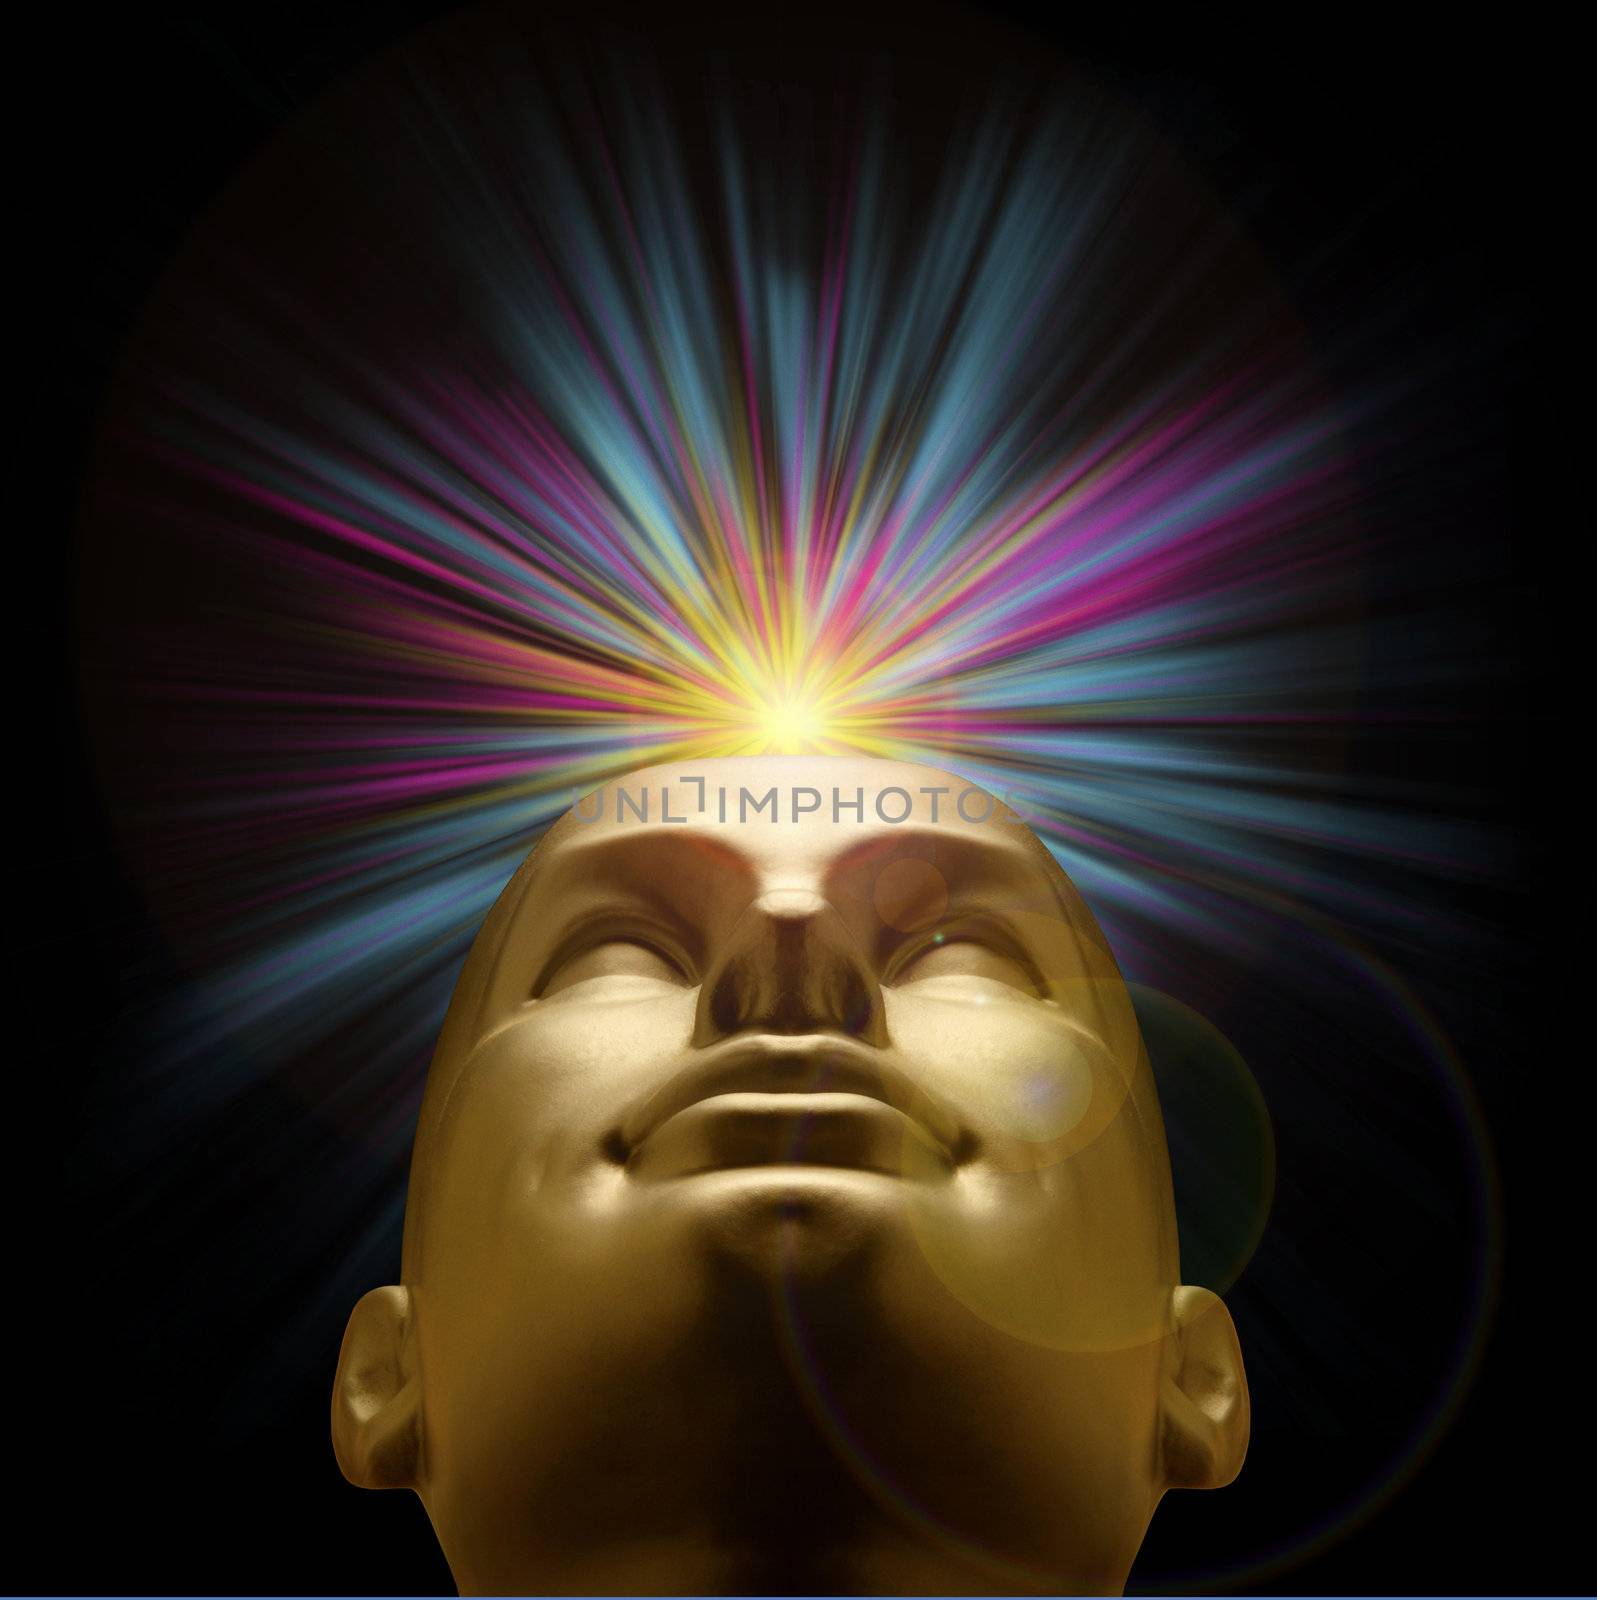 Golden mannequin head looking up with an explosion of purple and blue pastel light above, with lens flare